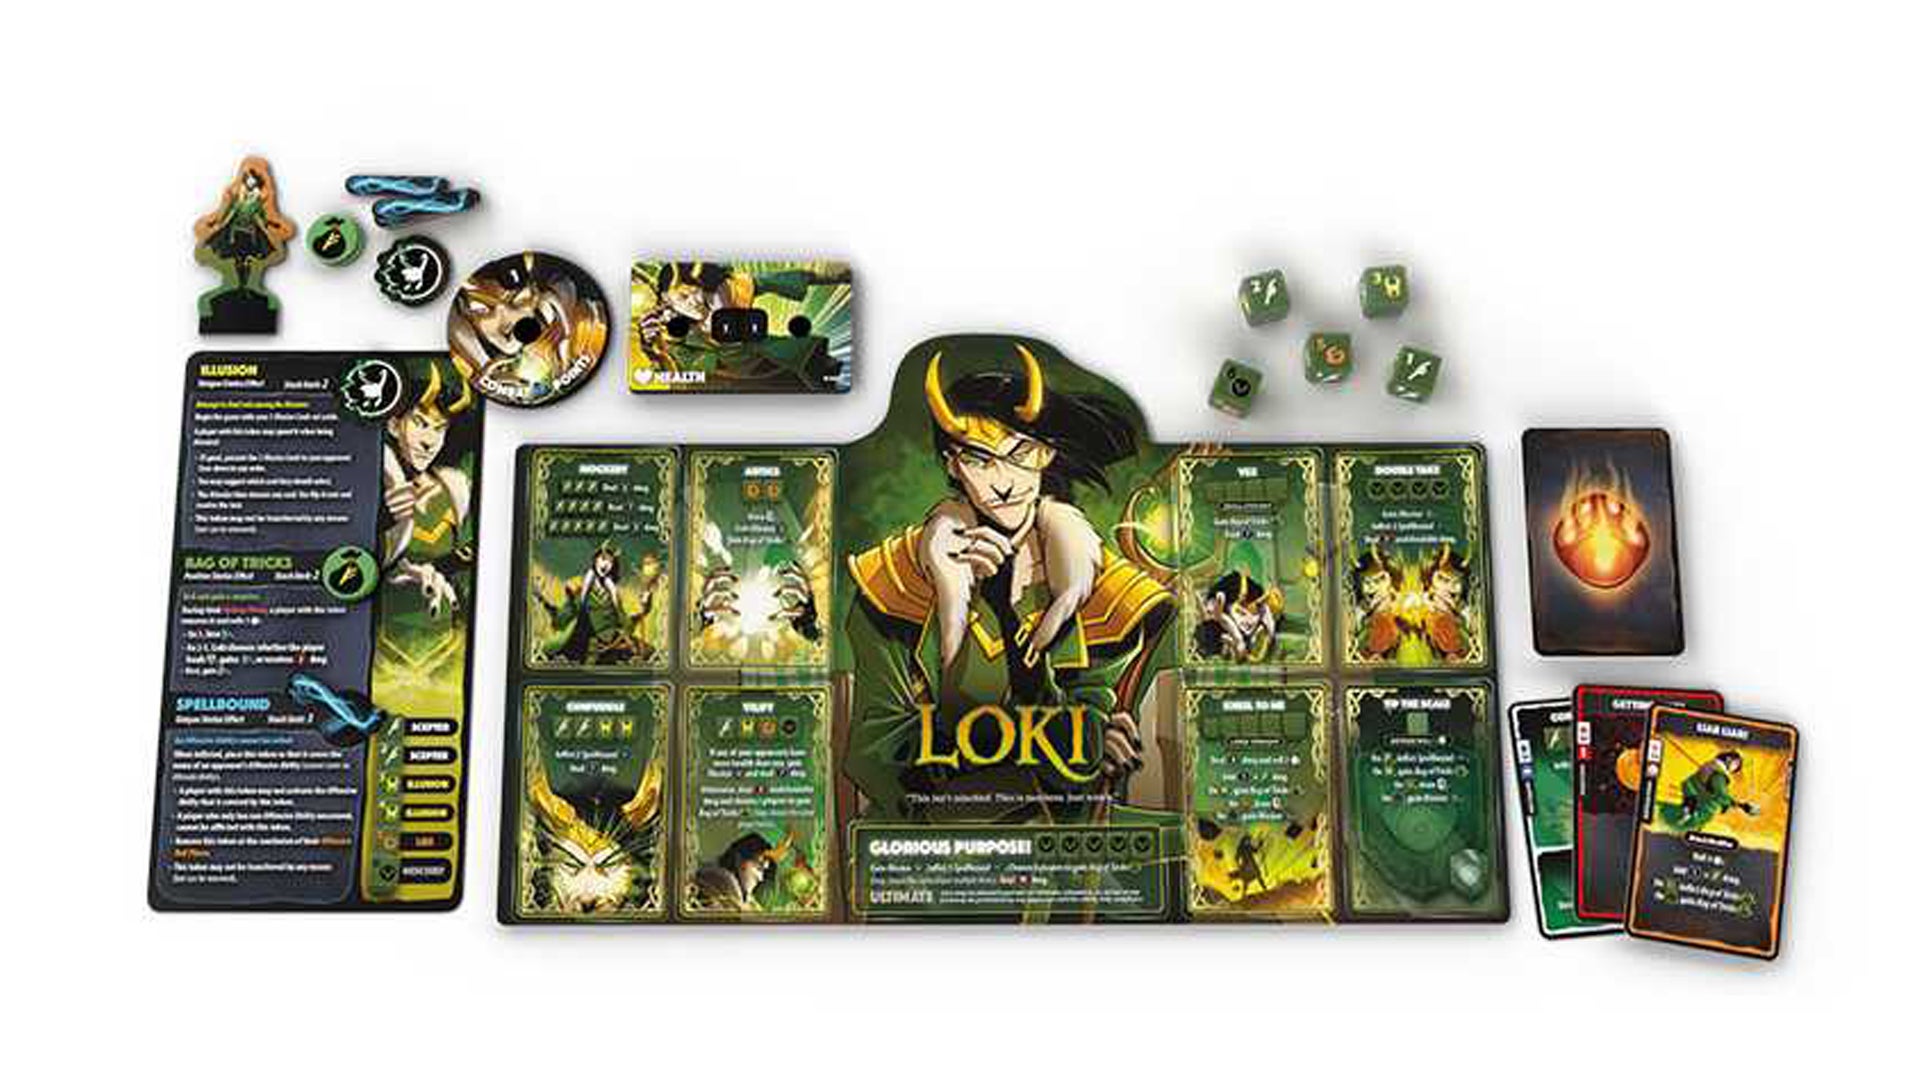 An image of the components for Loki for Marvel Dice Throne.